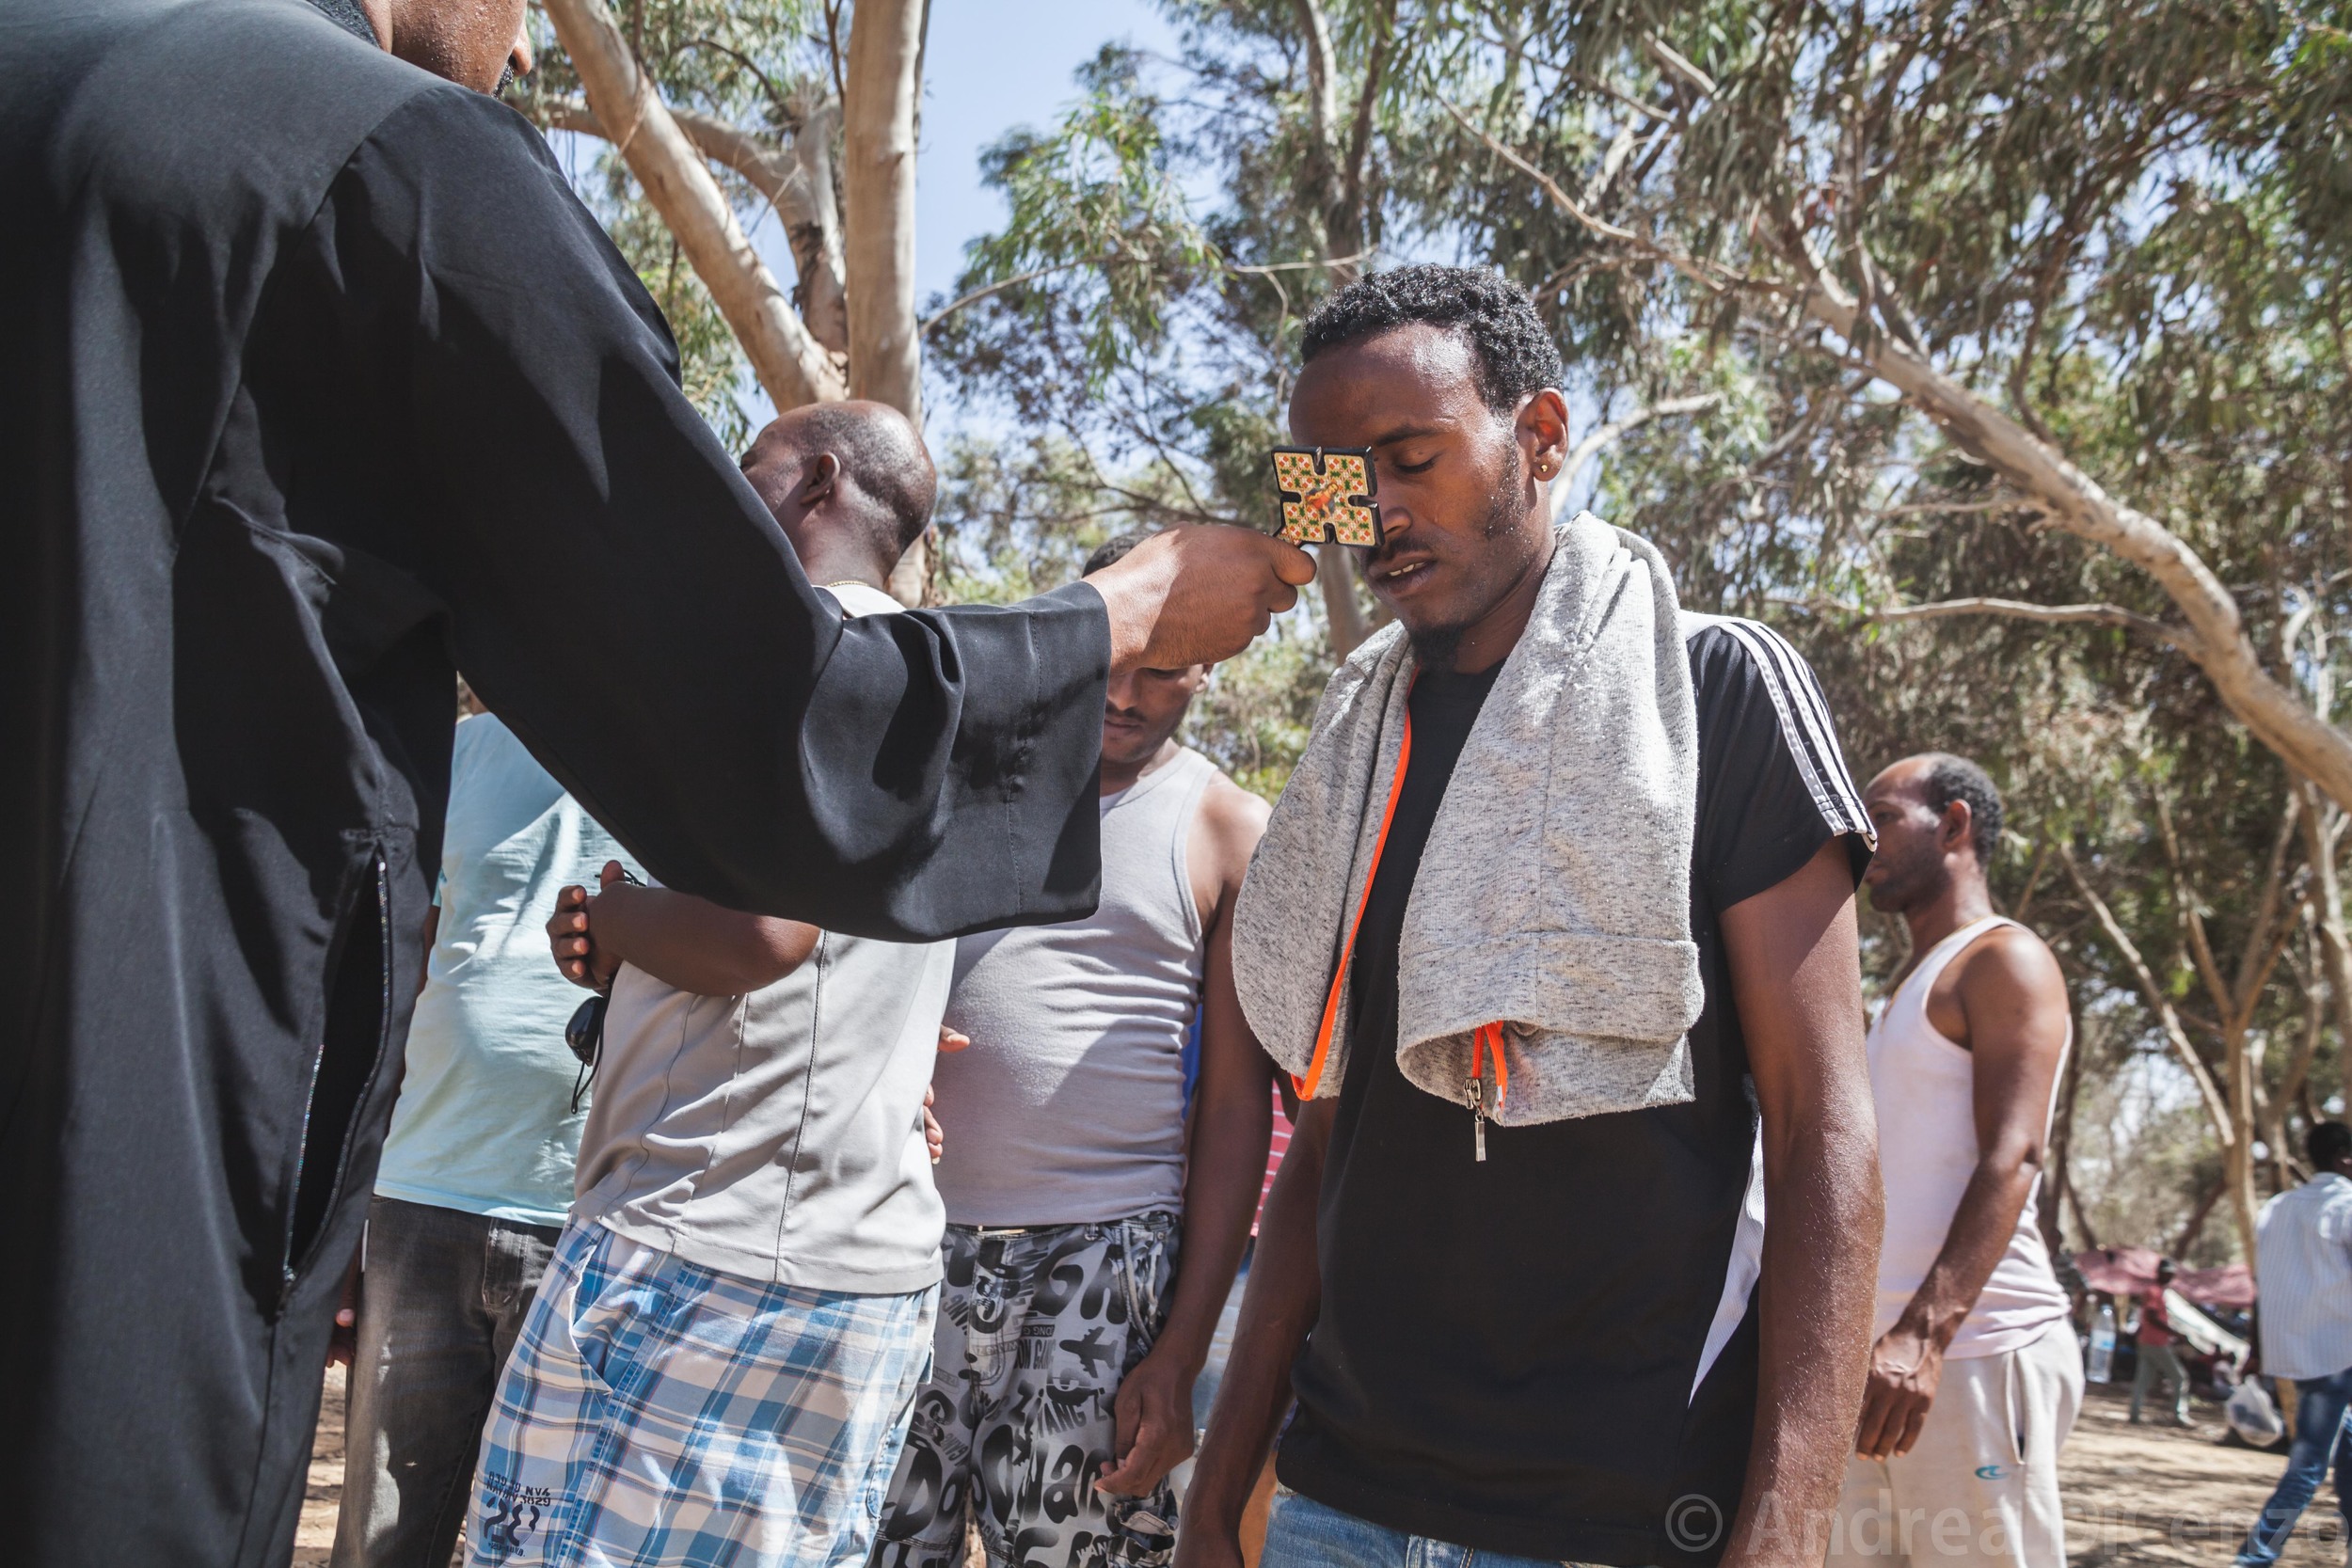  An Eritrean christian receives a blessing from a leader of the Christian community. The gentlemen is part of a protest from asylum seekers in Holot Detention Center who have left the establishment to protest living conditions for them in Israel. 